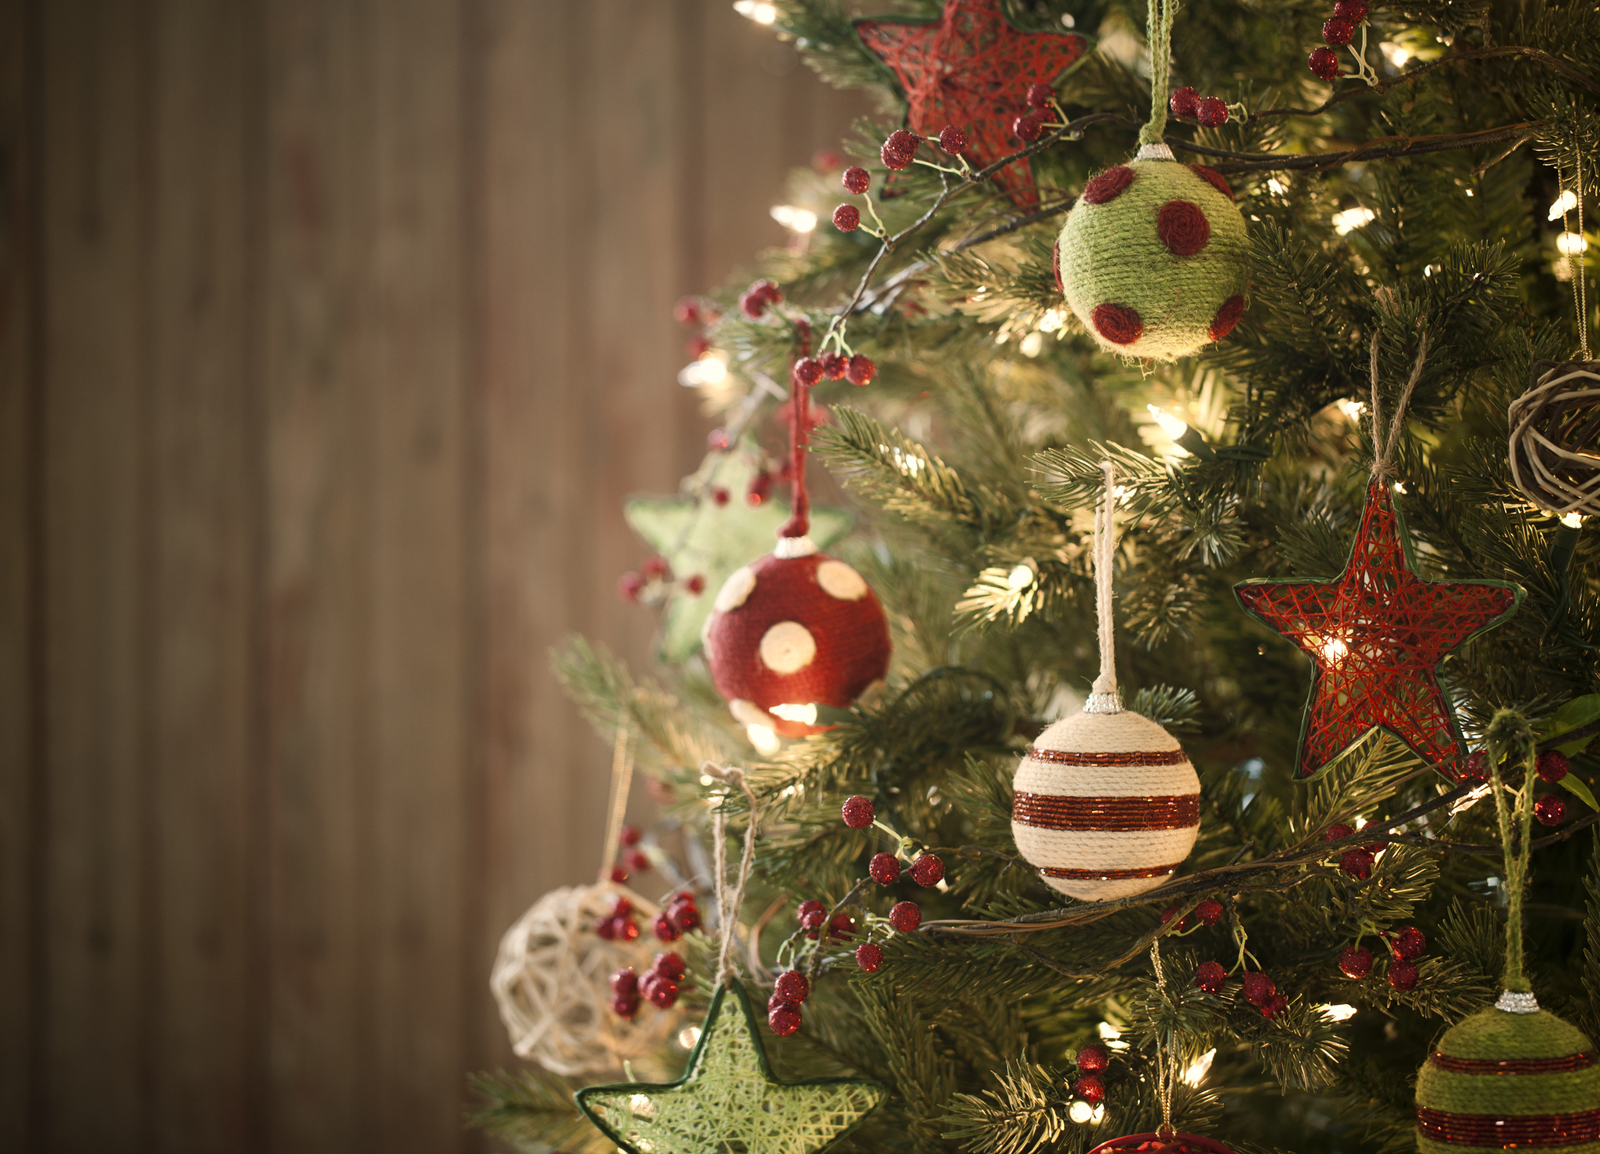 How Did the Tradition of Christmas Trees Start?